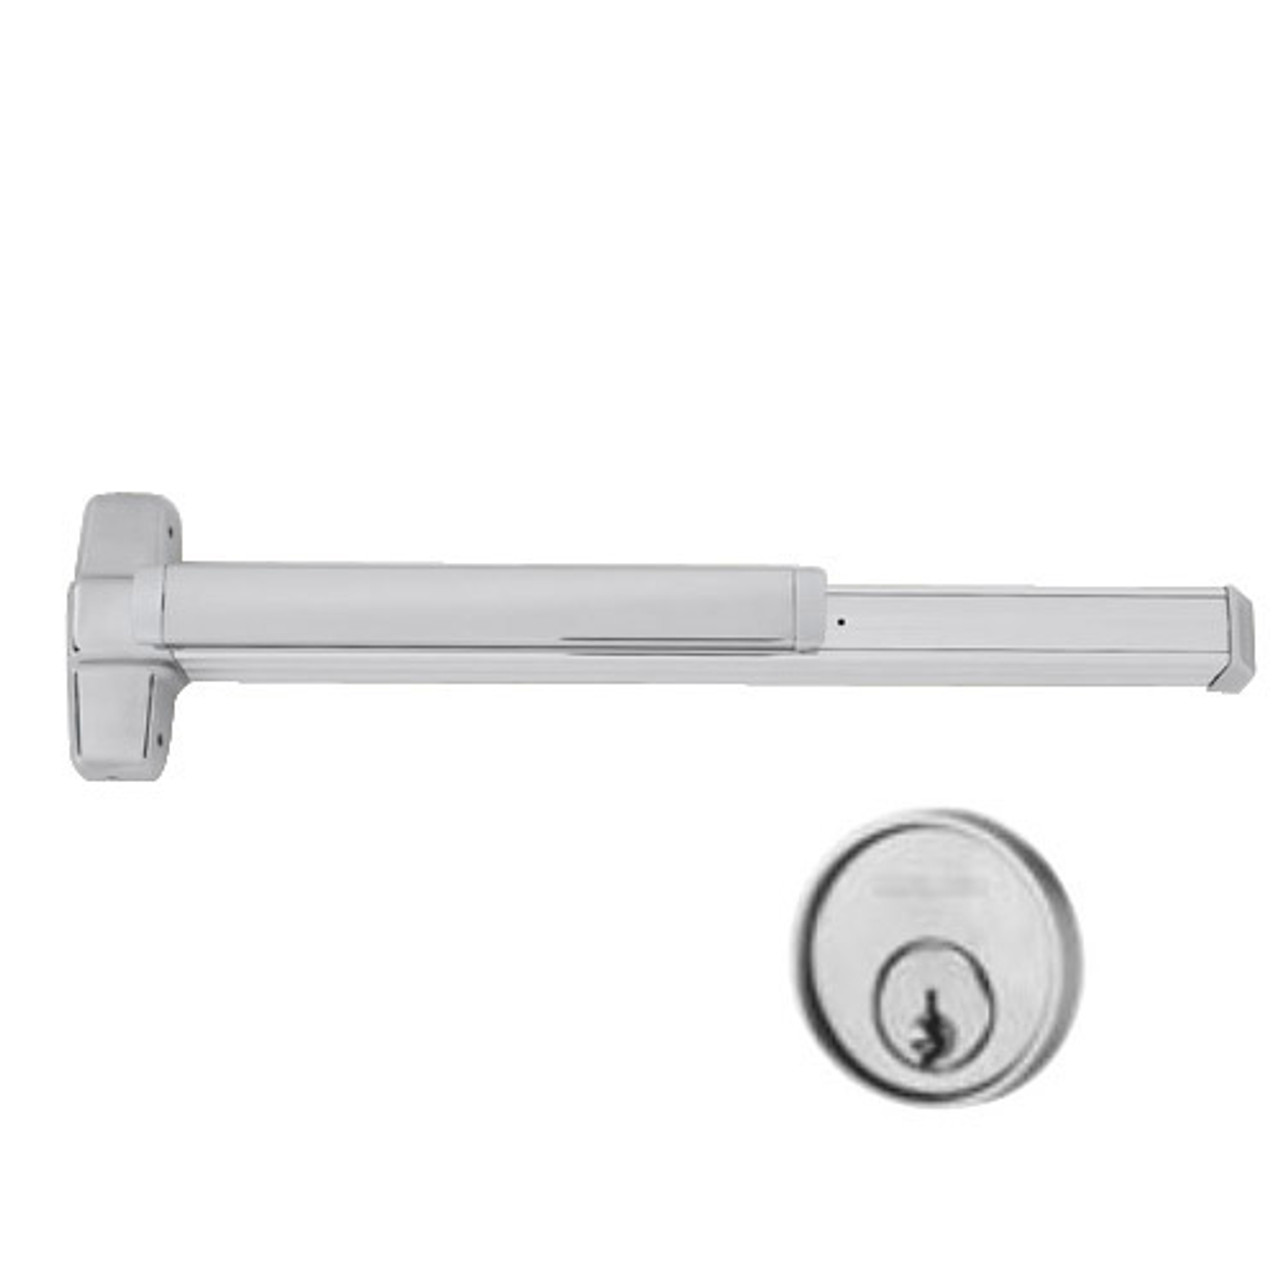 QEL-9850WDC-NL-OP-US32D-4 Von Duprin Exit Device in Satin Stainless